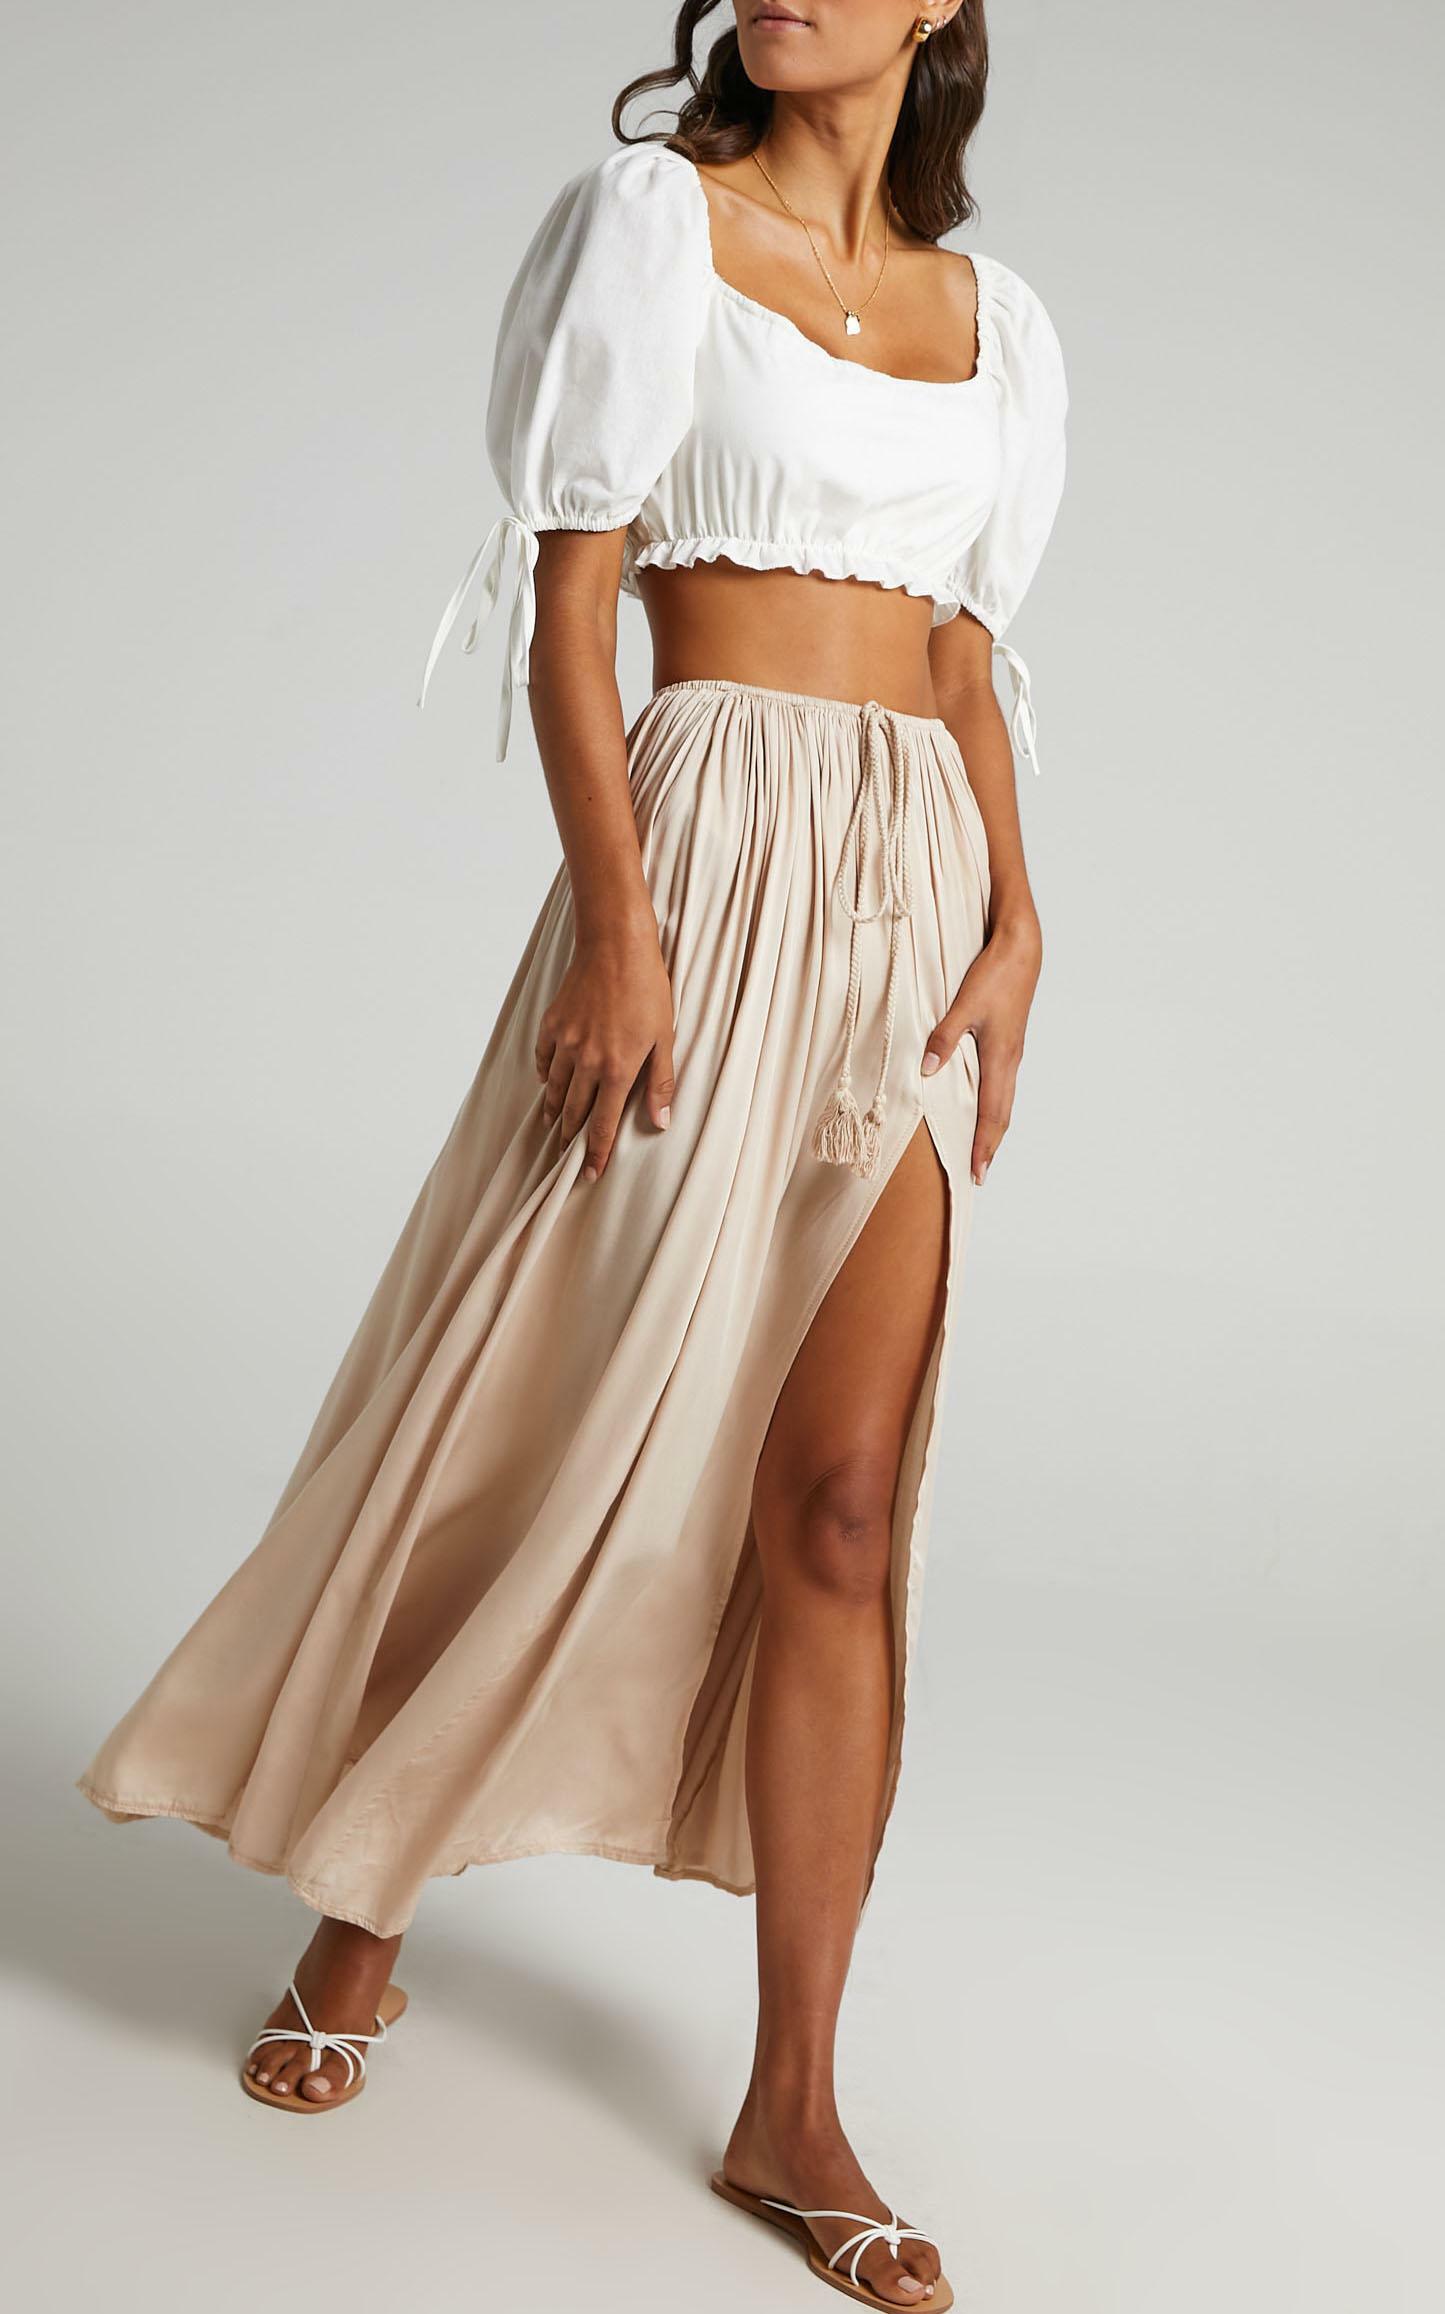 Under The Twilight Maxi Skirt in Beige - 06, BRN3, hi-res image number null